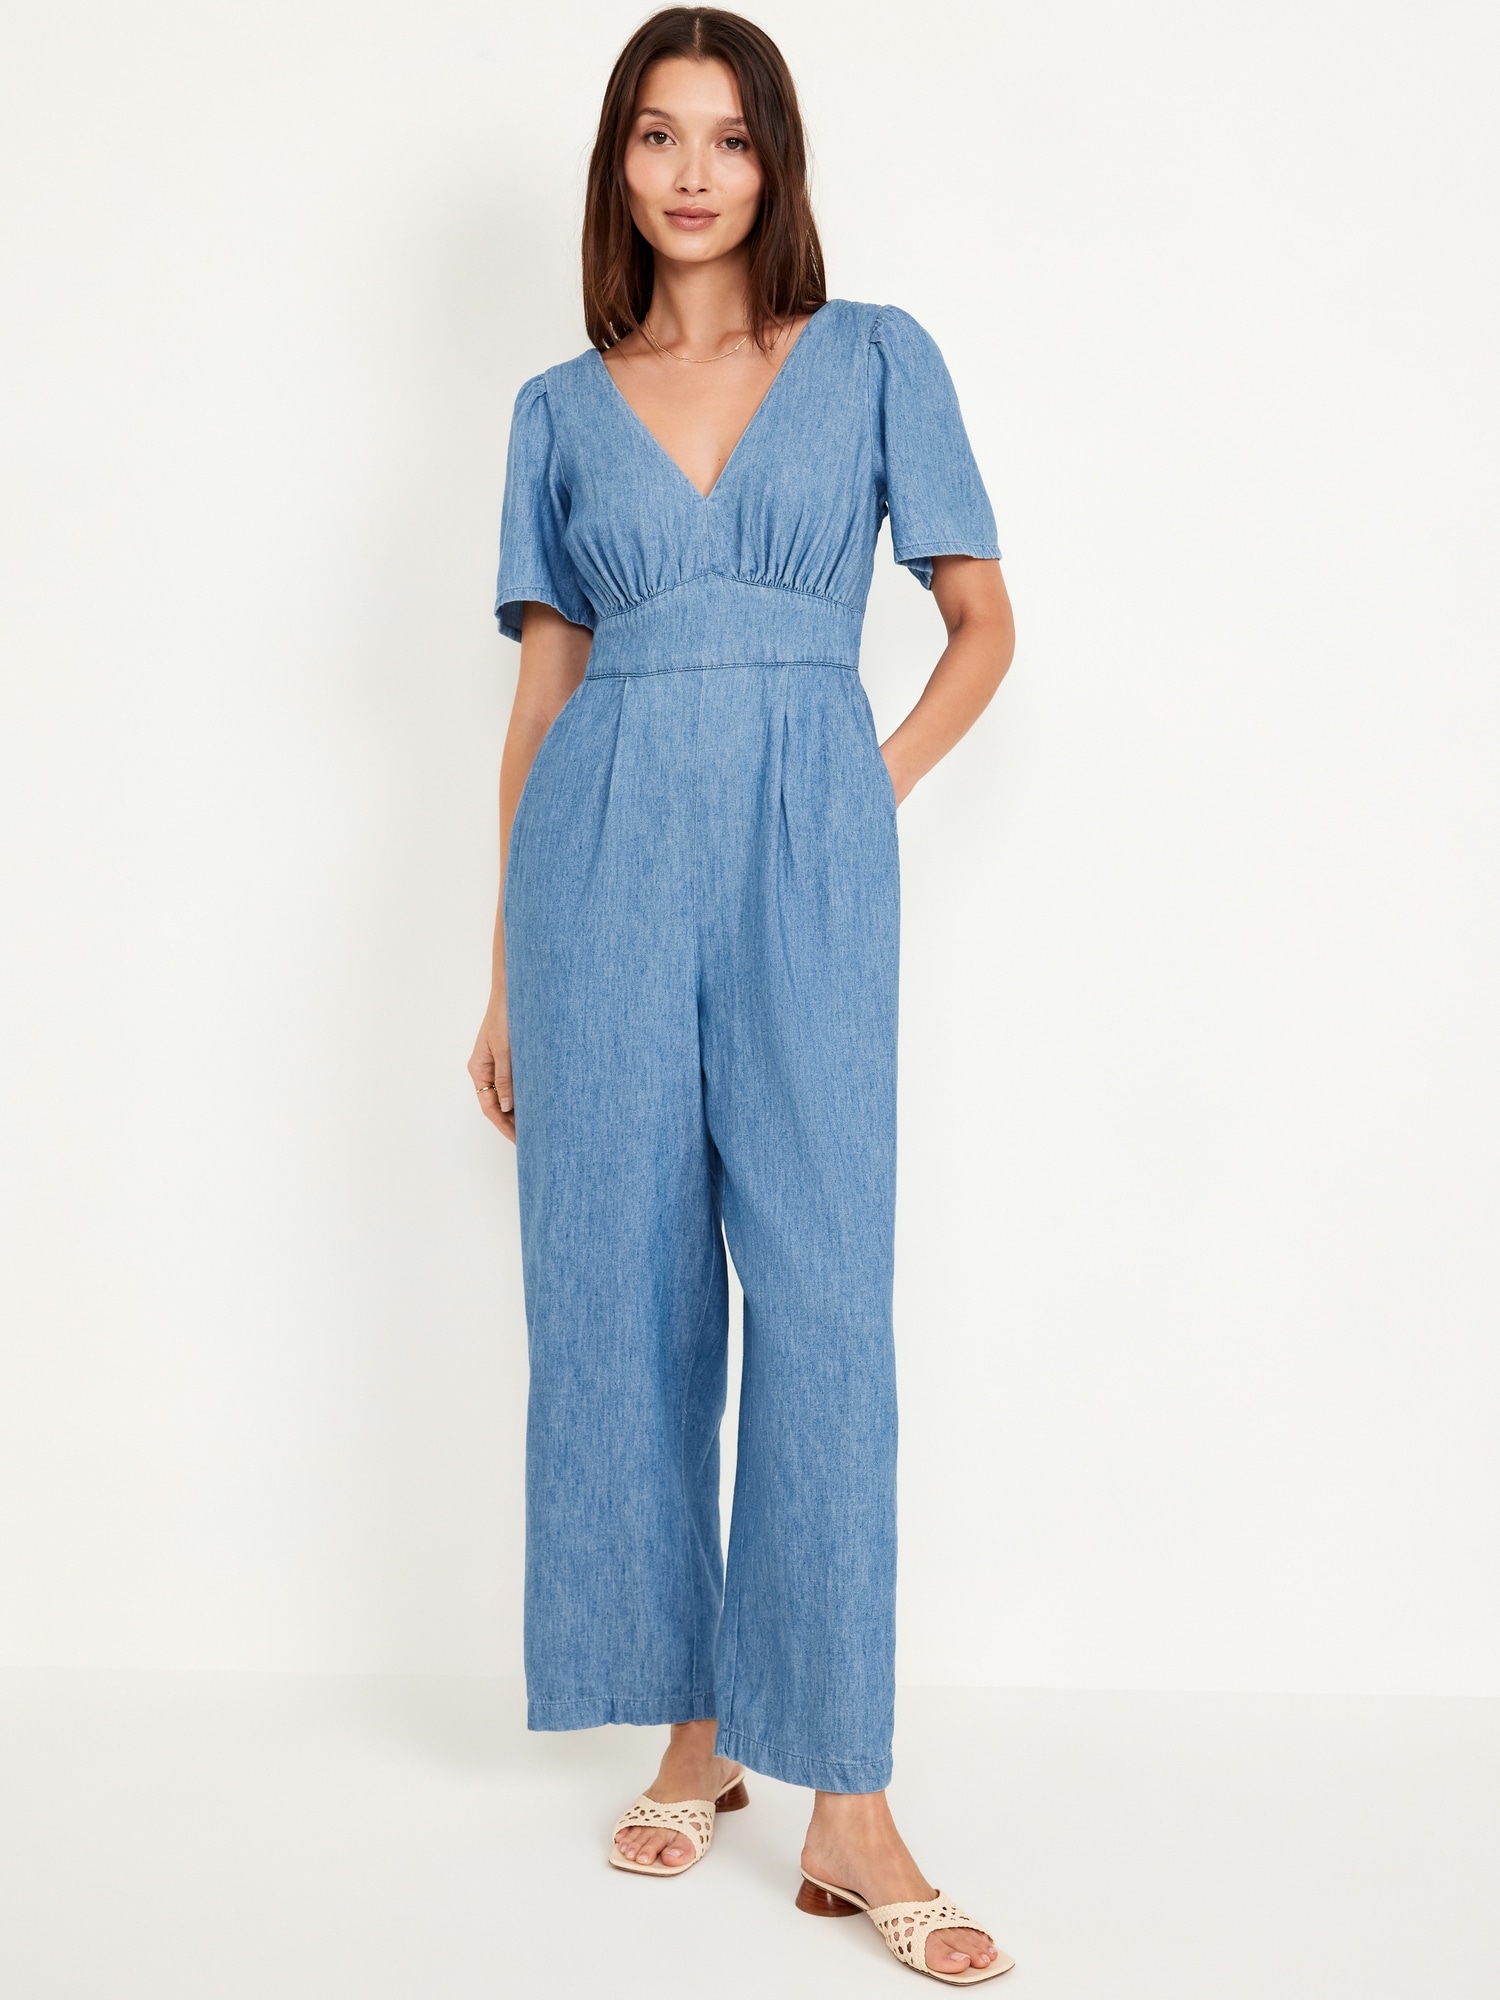 Women's Jumpsuits With Sleeves